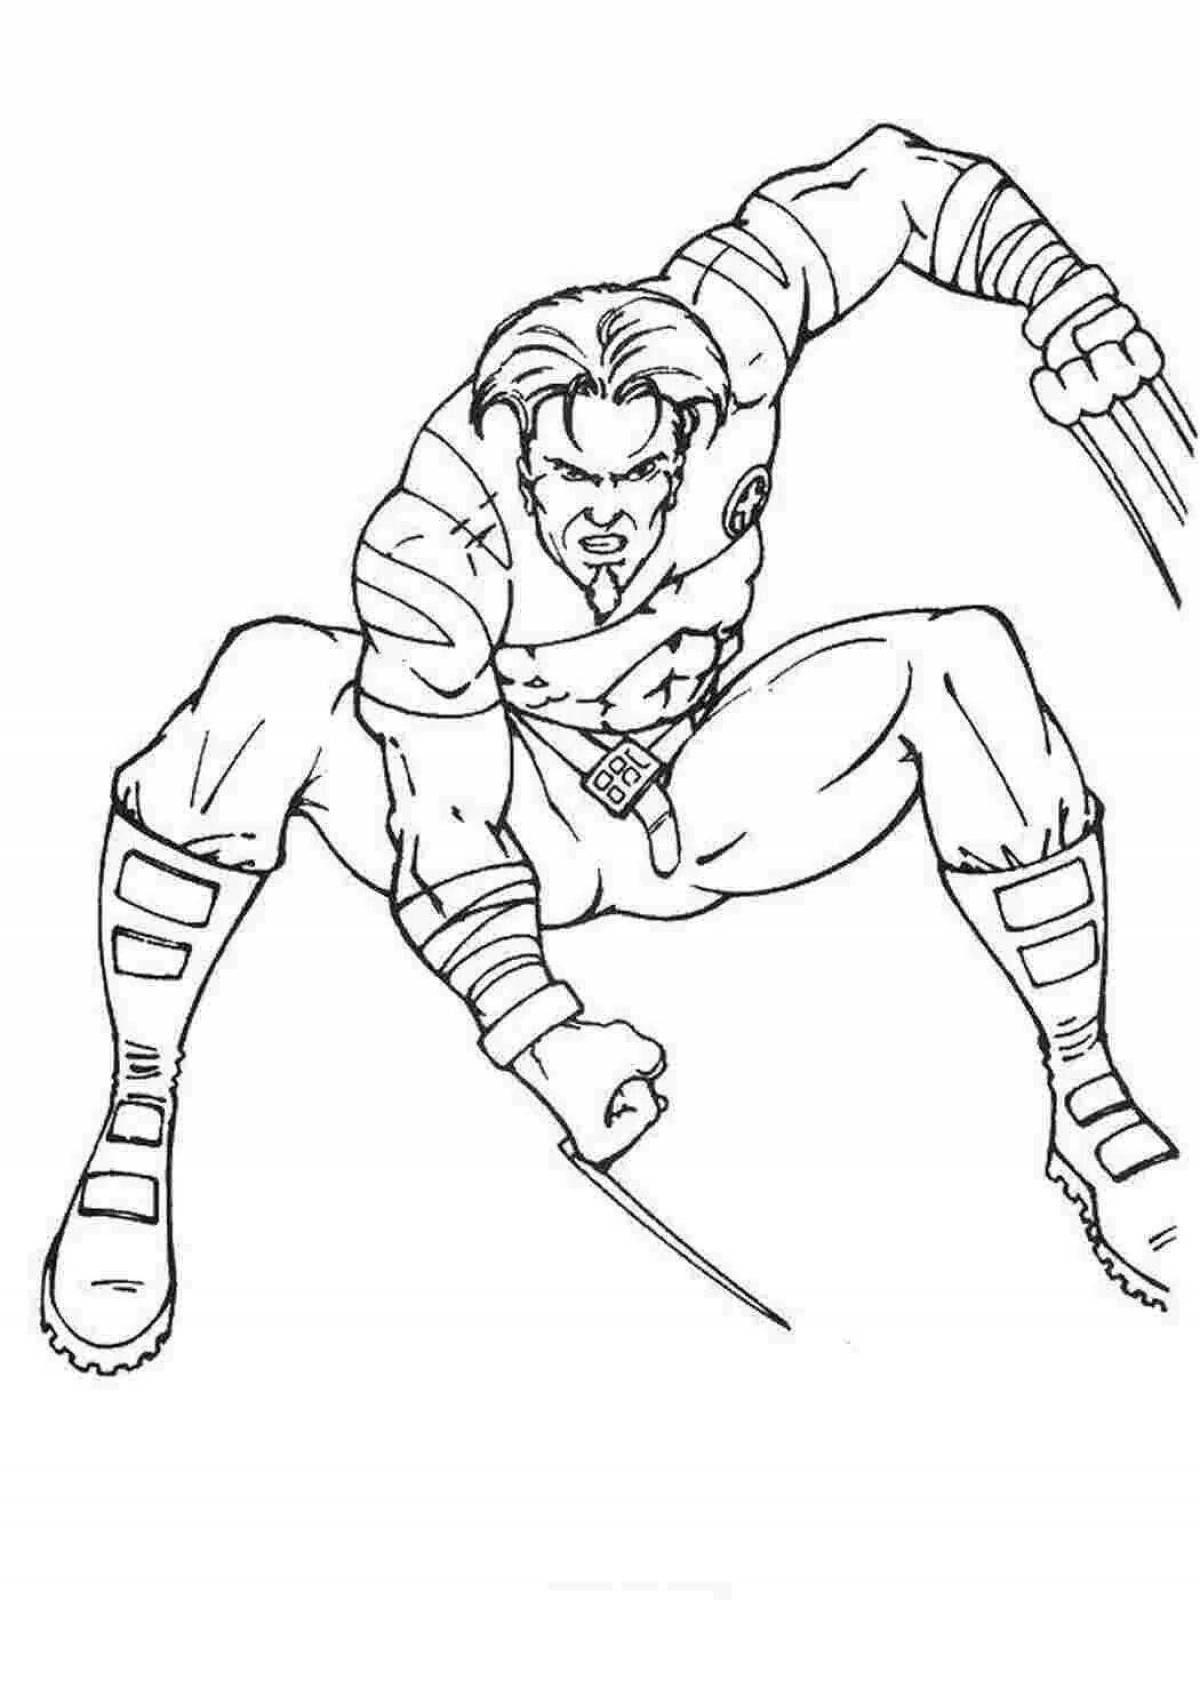 Charming wolverine coloring book for kids